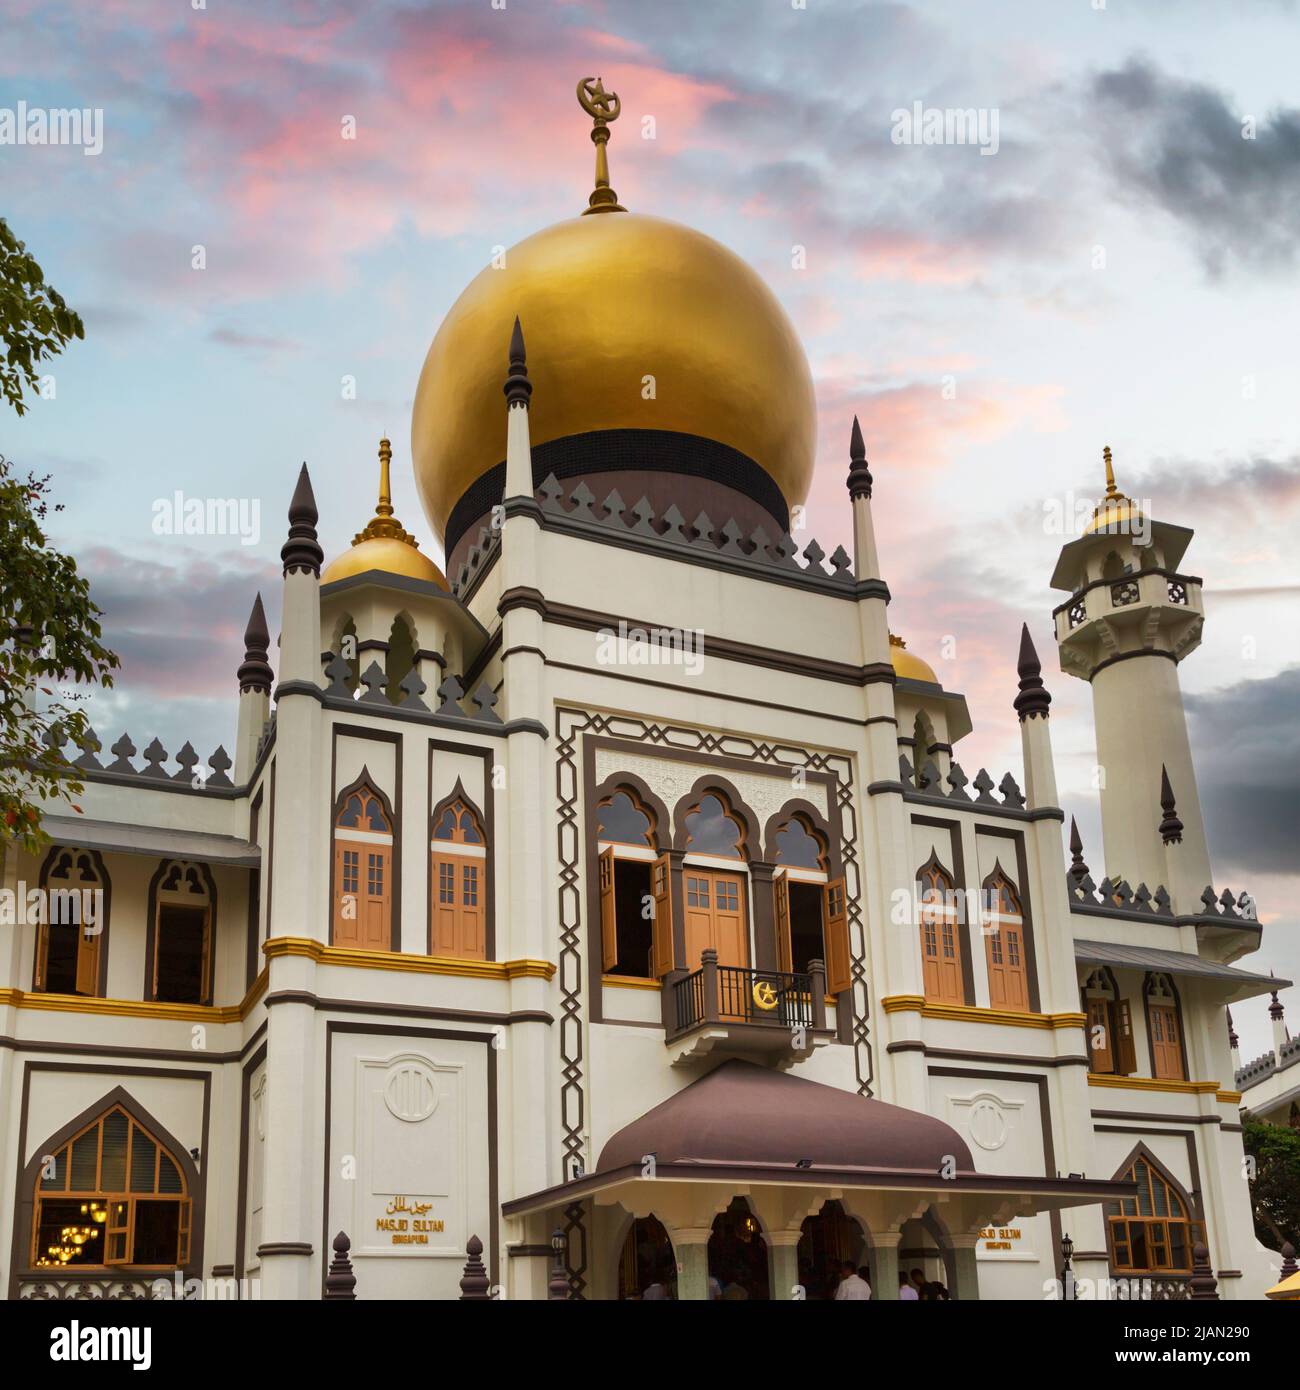 The Sultan Mosque, or Masjid Sultan, Republic of Singapore.  Sultan Mosque is the largest in Singapore and a national monument.  It was designed by Si Stock Photo